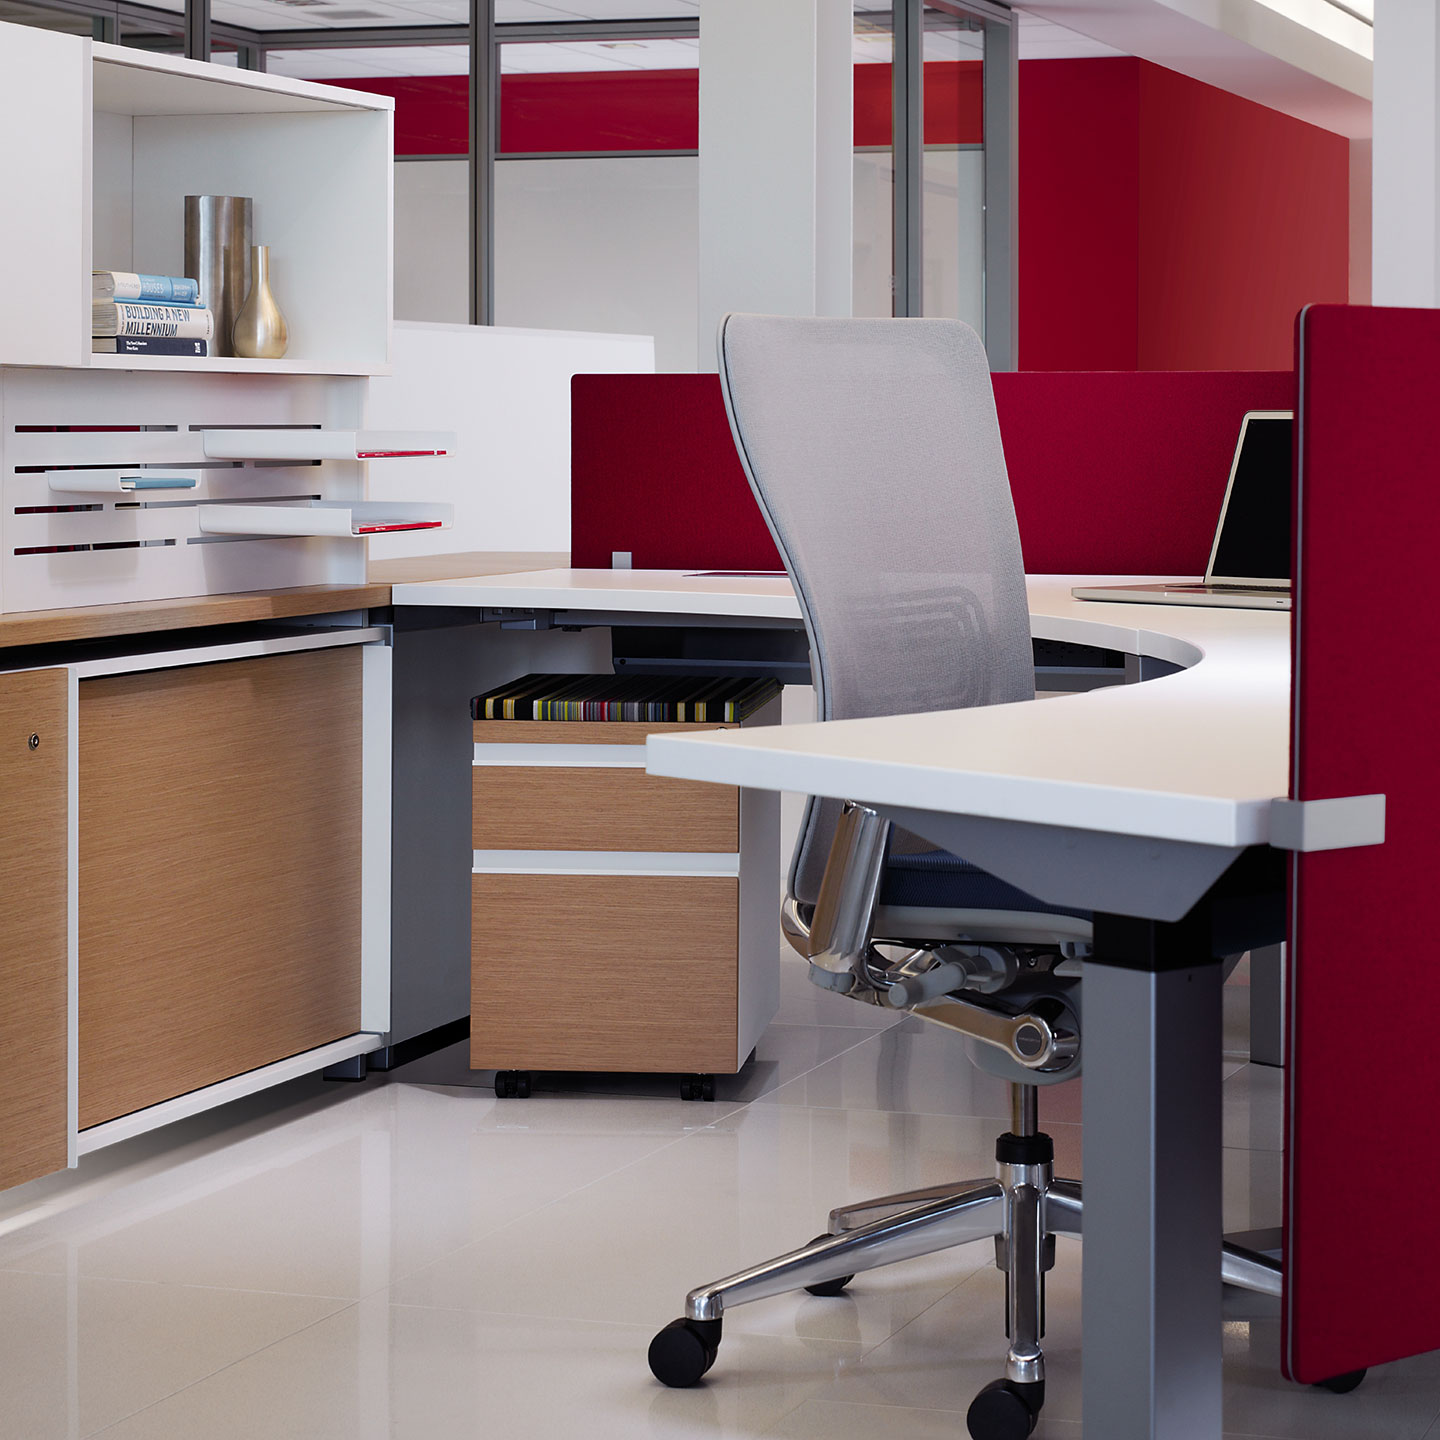 Haworth Premise workspace in a closed office area for work with storage and shelving 